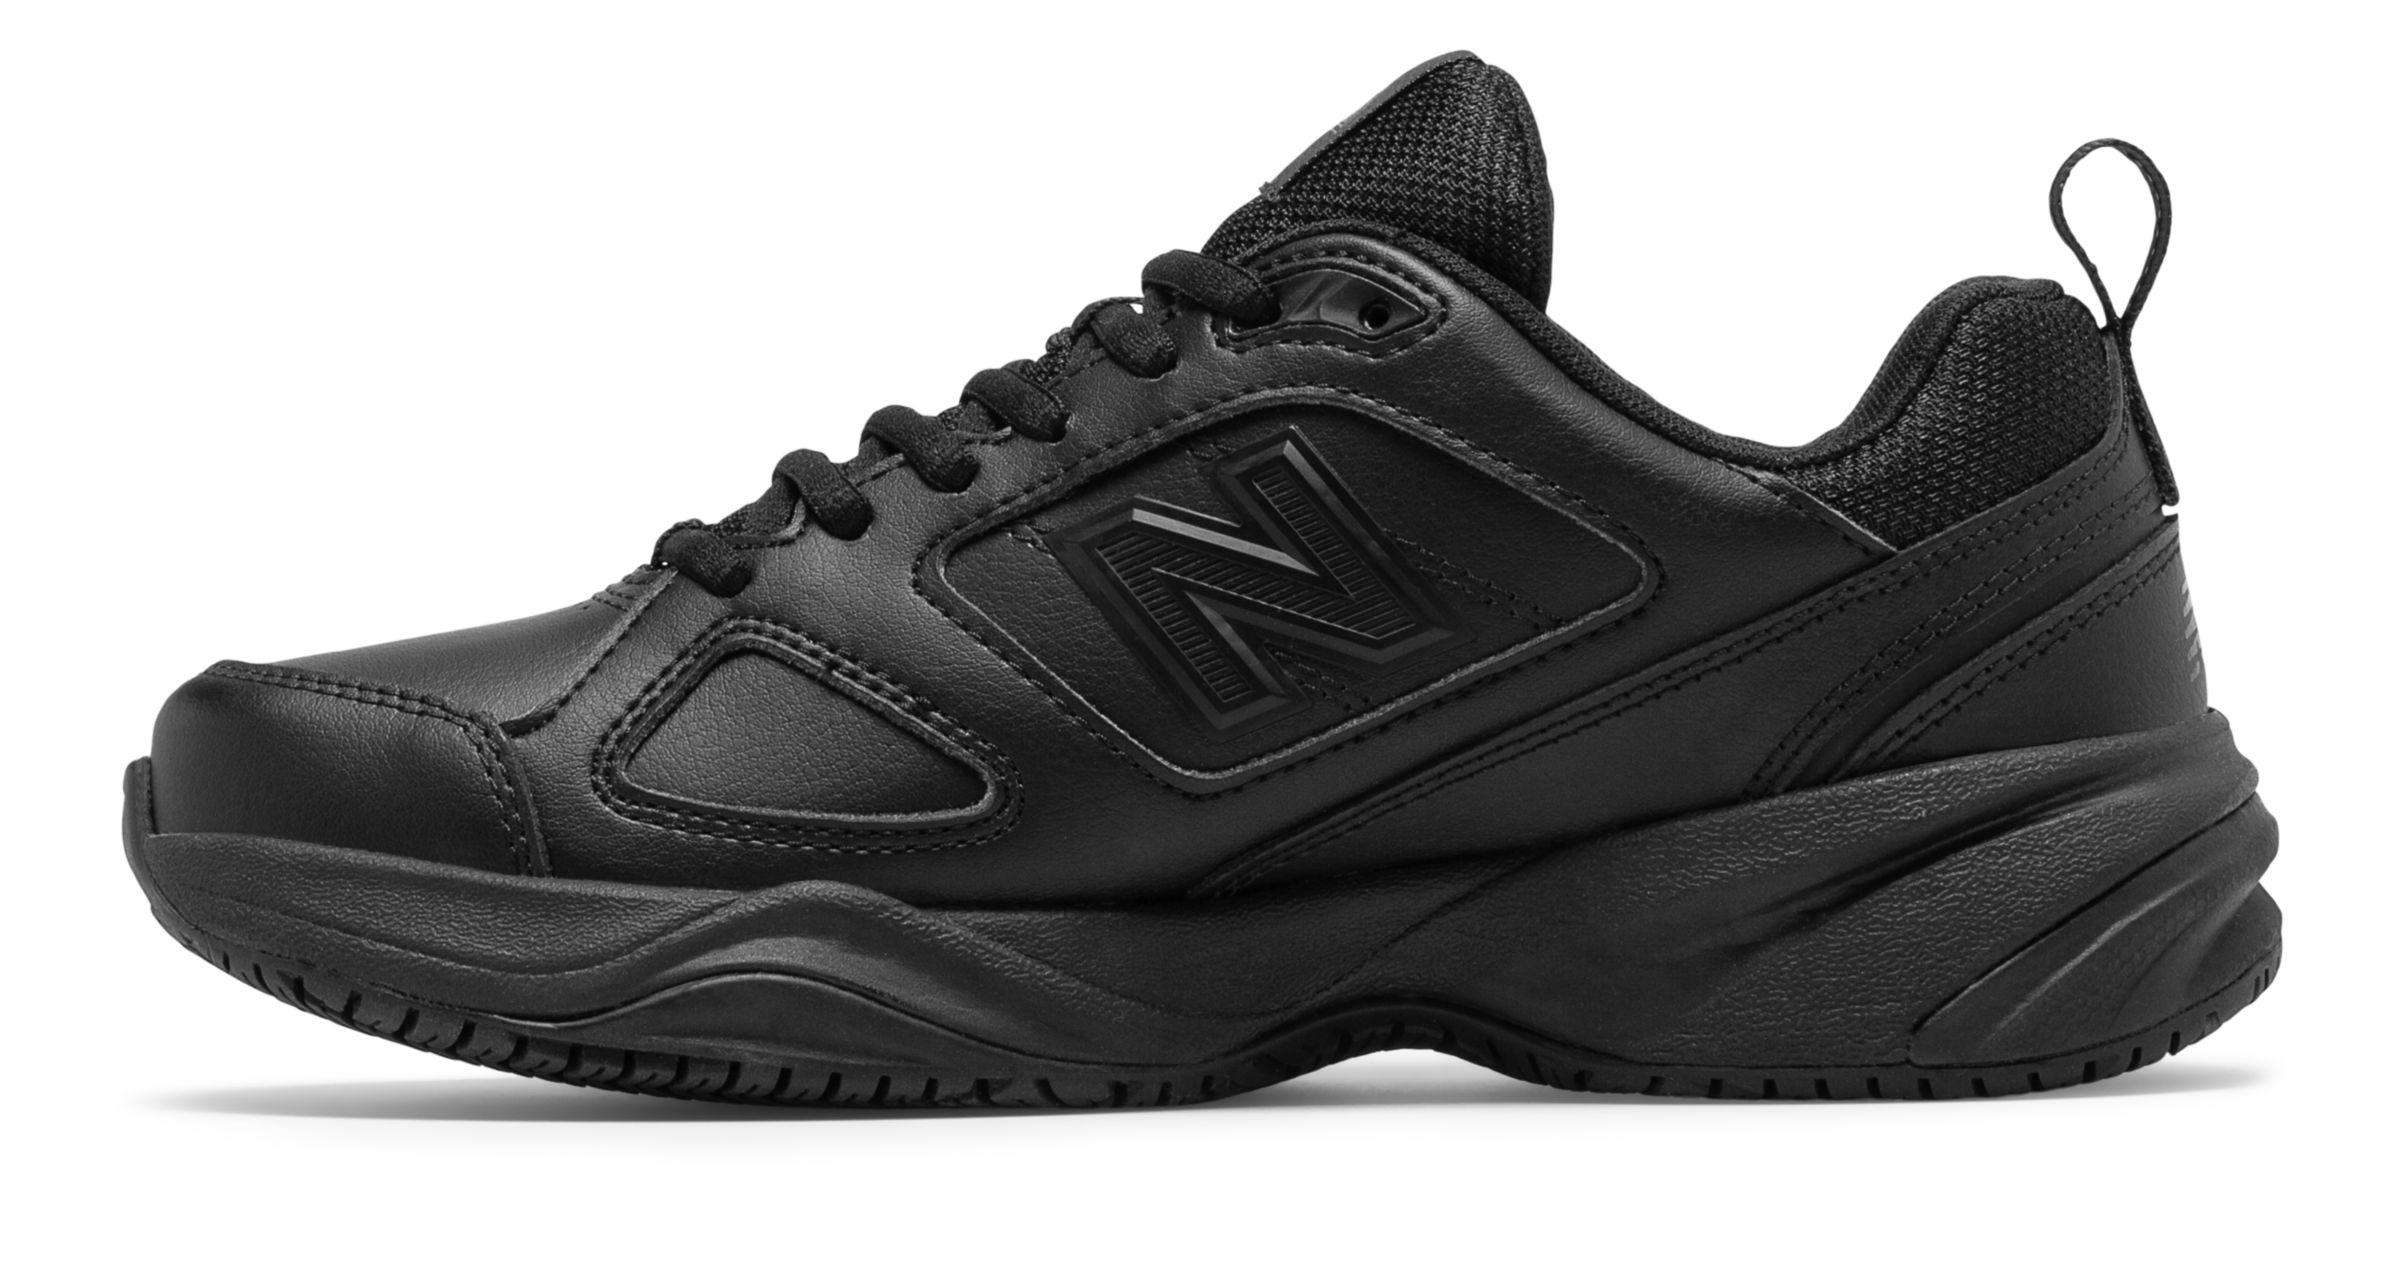 new balance slip resistant 626v2,Save up to 16%,www.ilcascinone.com